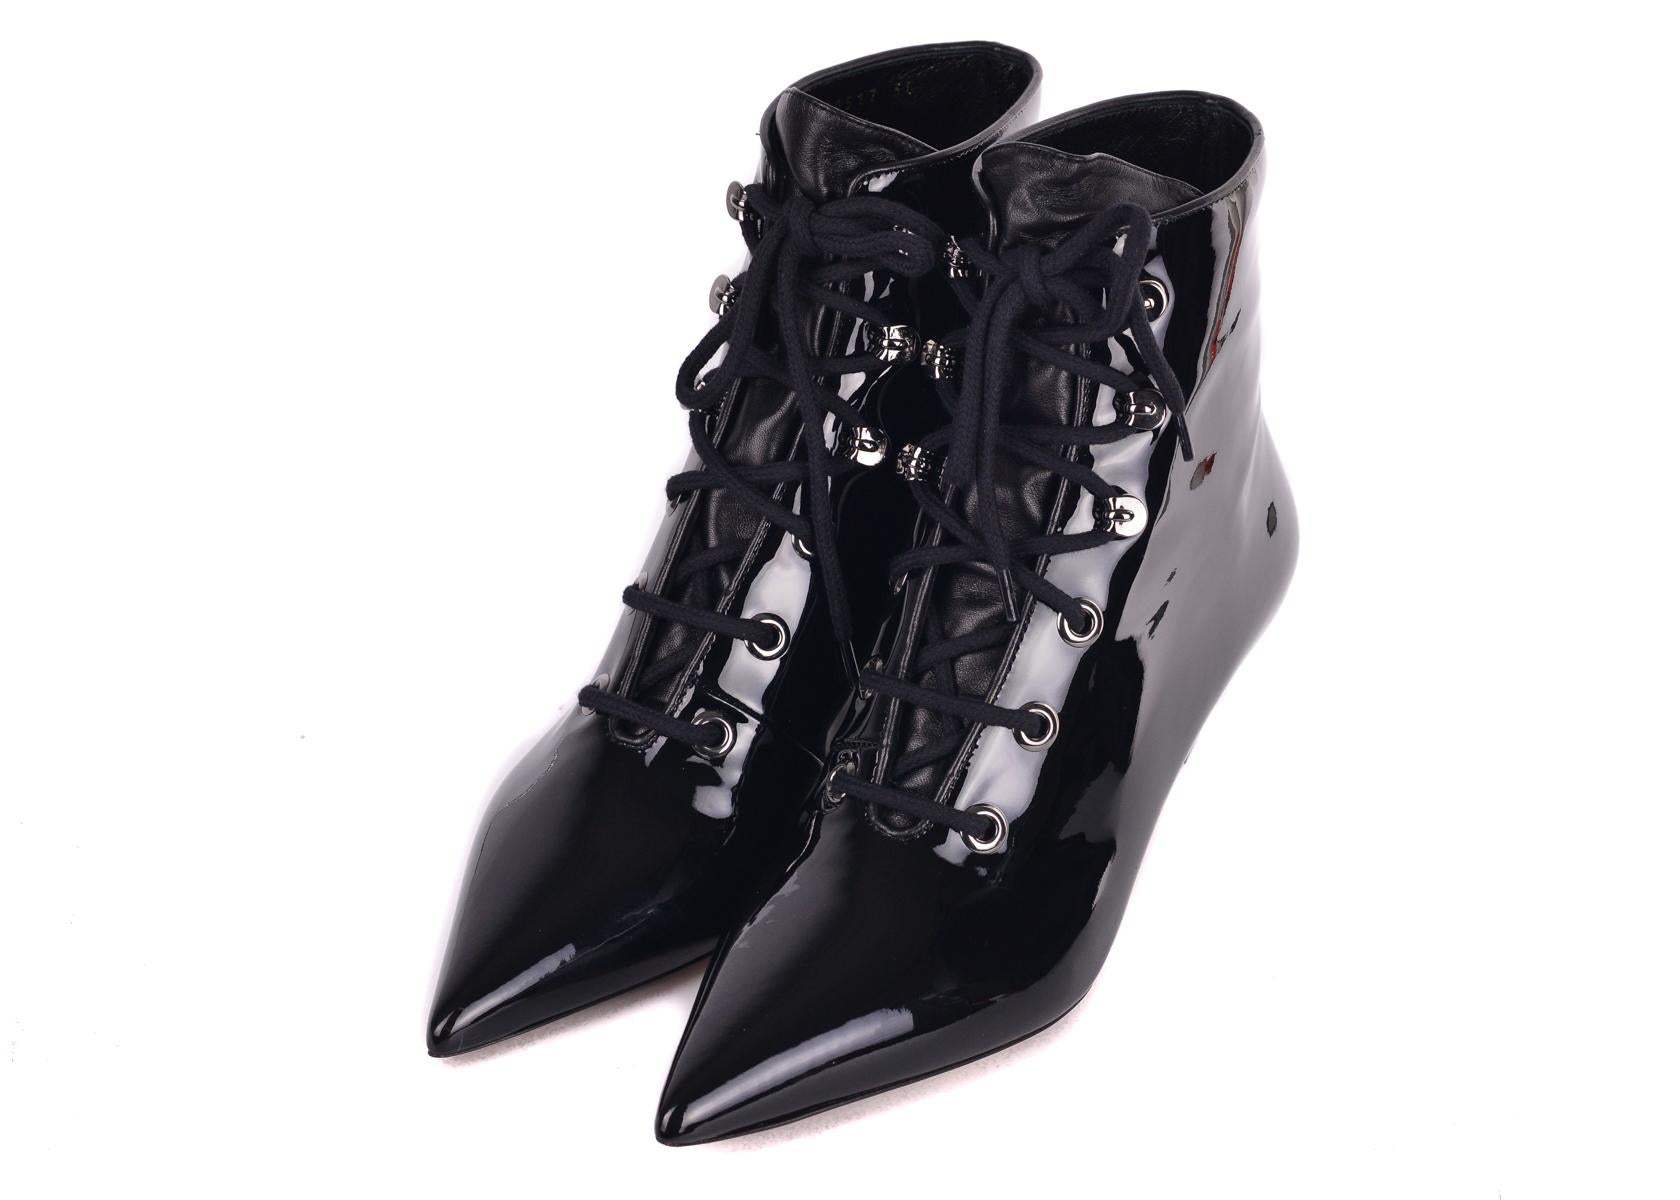 Dior Women's I-Dior Black Patent Leather Lace Up Boots im Zustand „Neu“ im Angebot in Brooklyn, NY